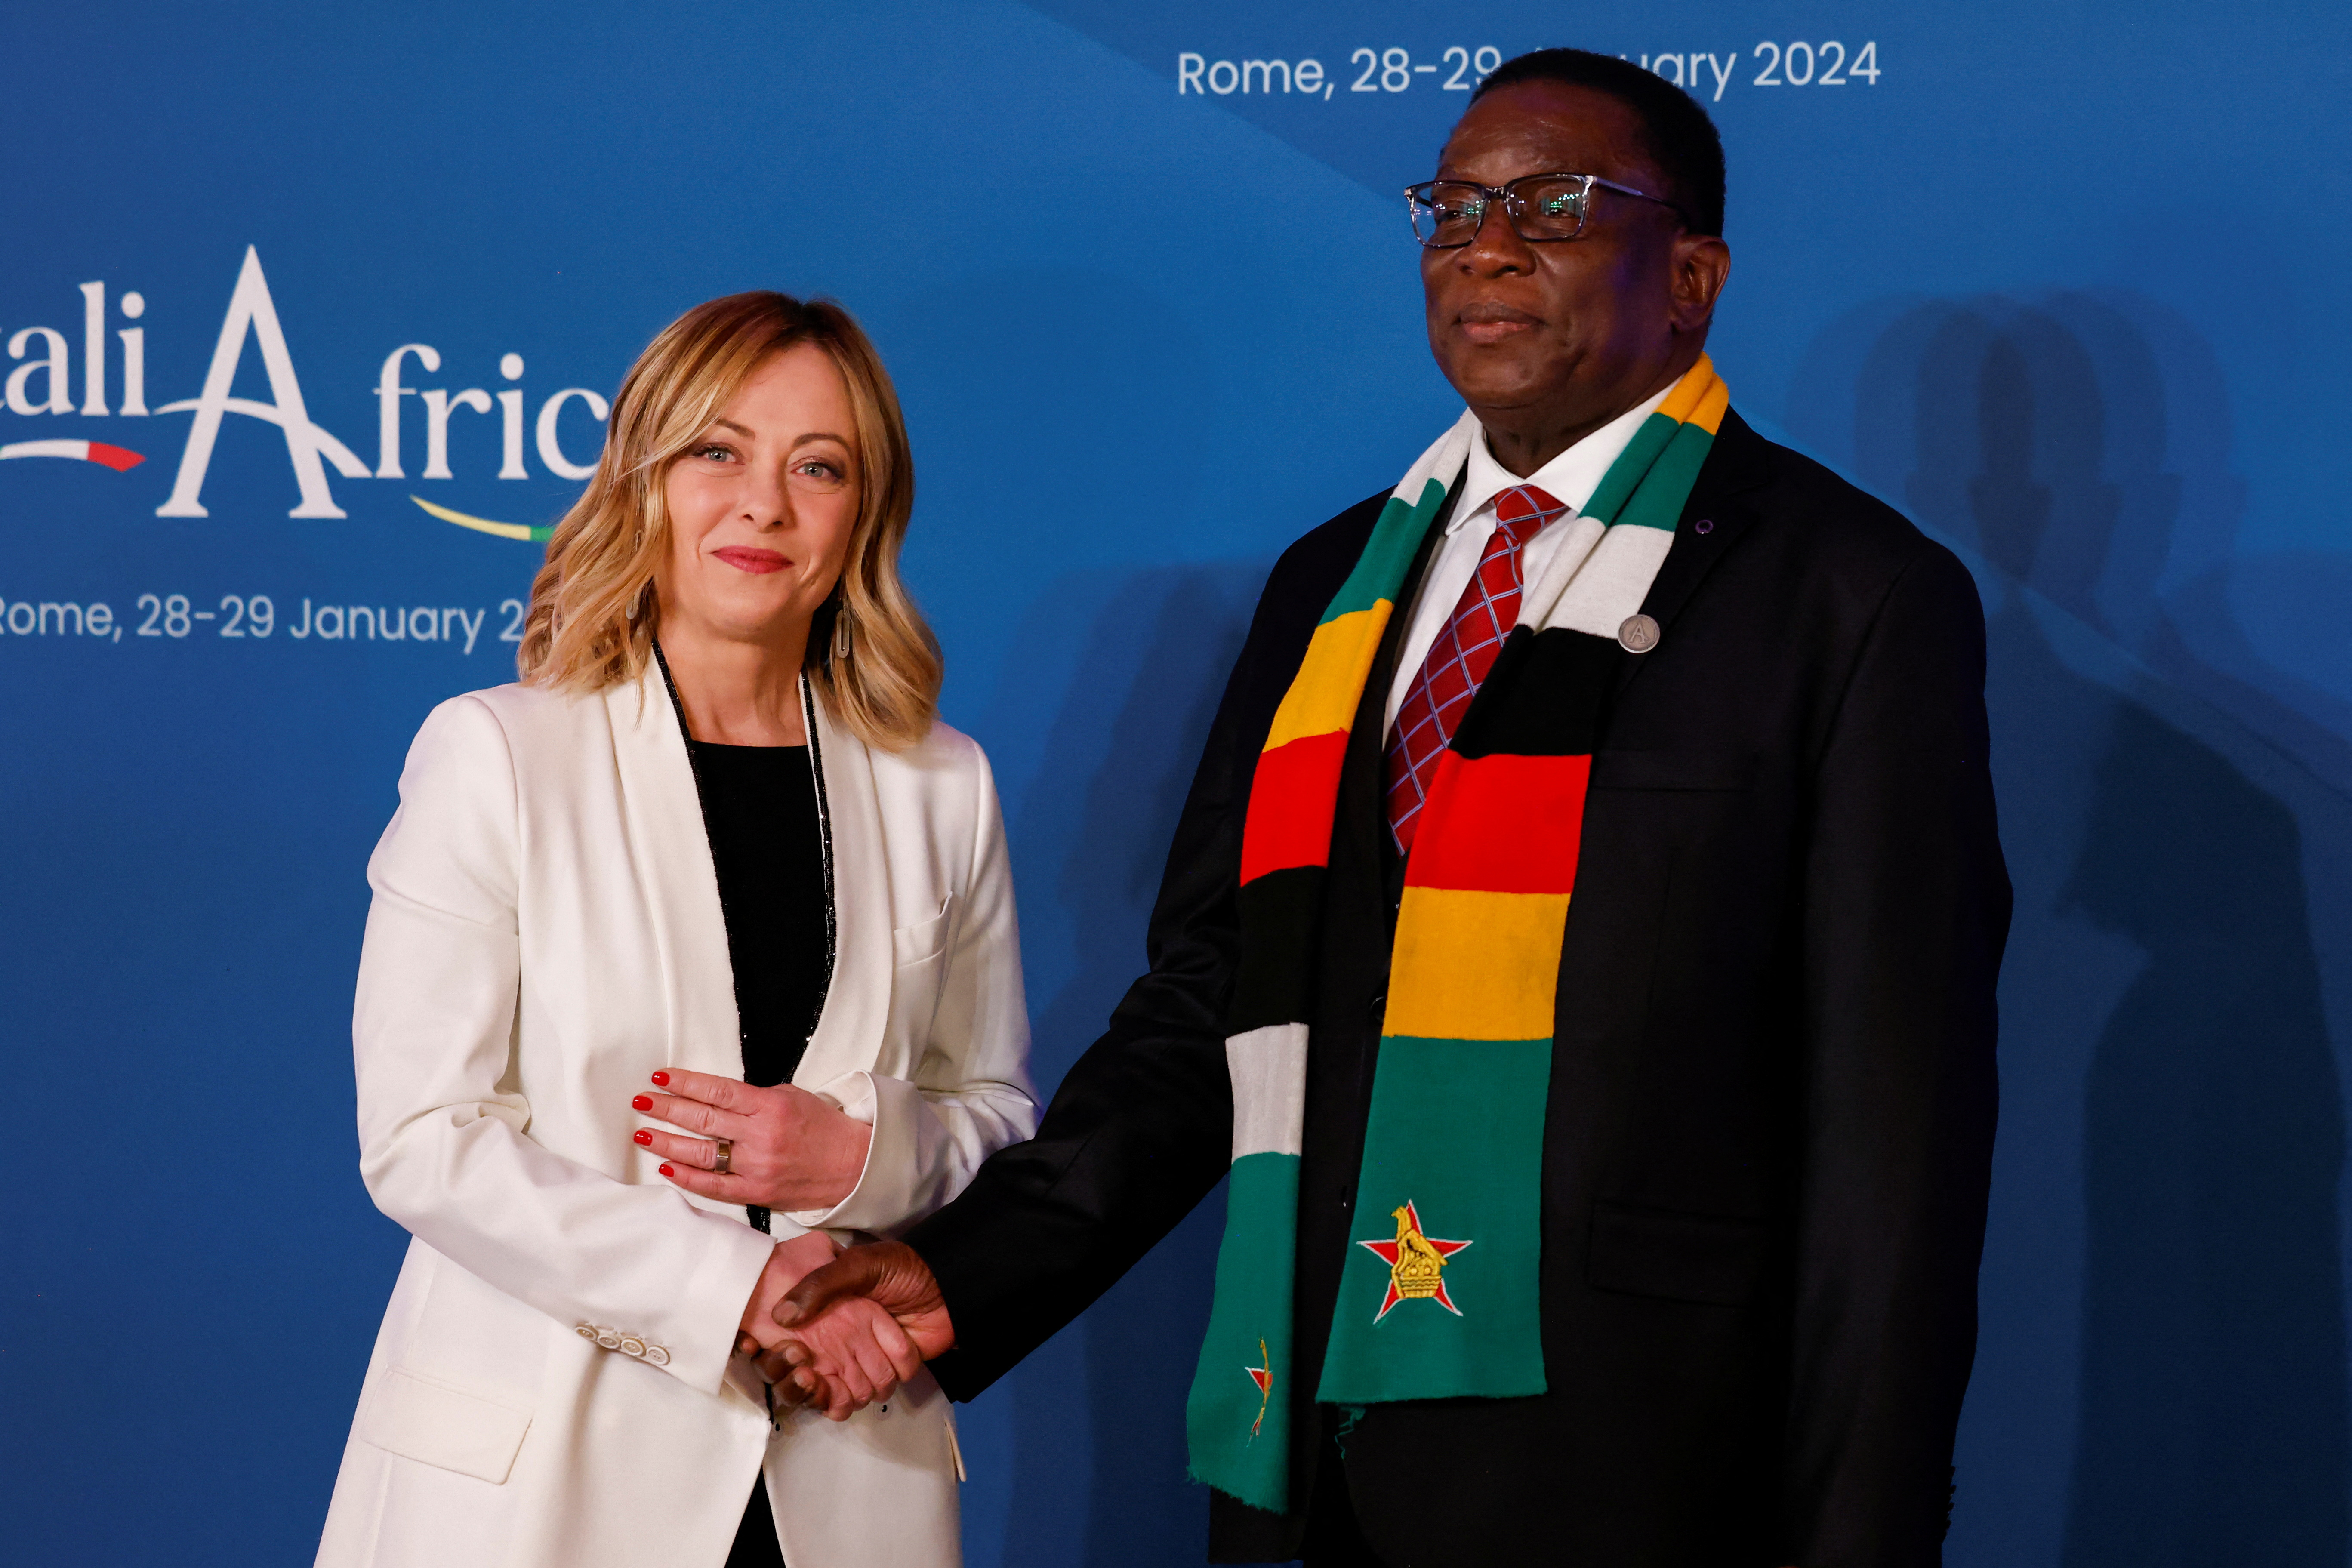 Italy's Prime Minister Giorgia Meloni meets with President of Zimbabwe Emmerson Mnangagwa inside the Madama Palace (Senate) as Italy hosts the Italy-Africa summit in Rome, Italy January 29, 2024. REUTERS/Remo Casilli